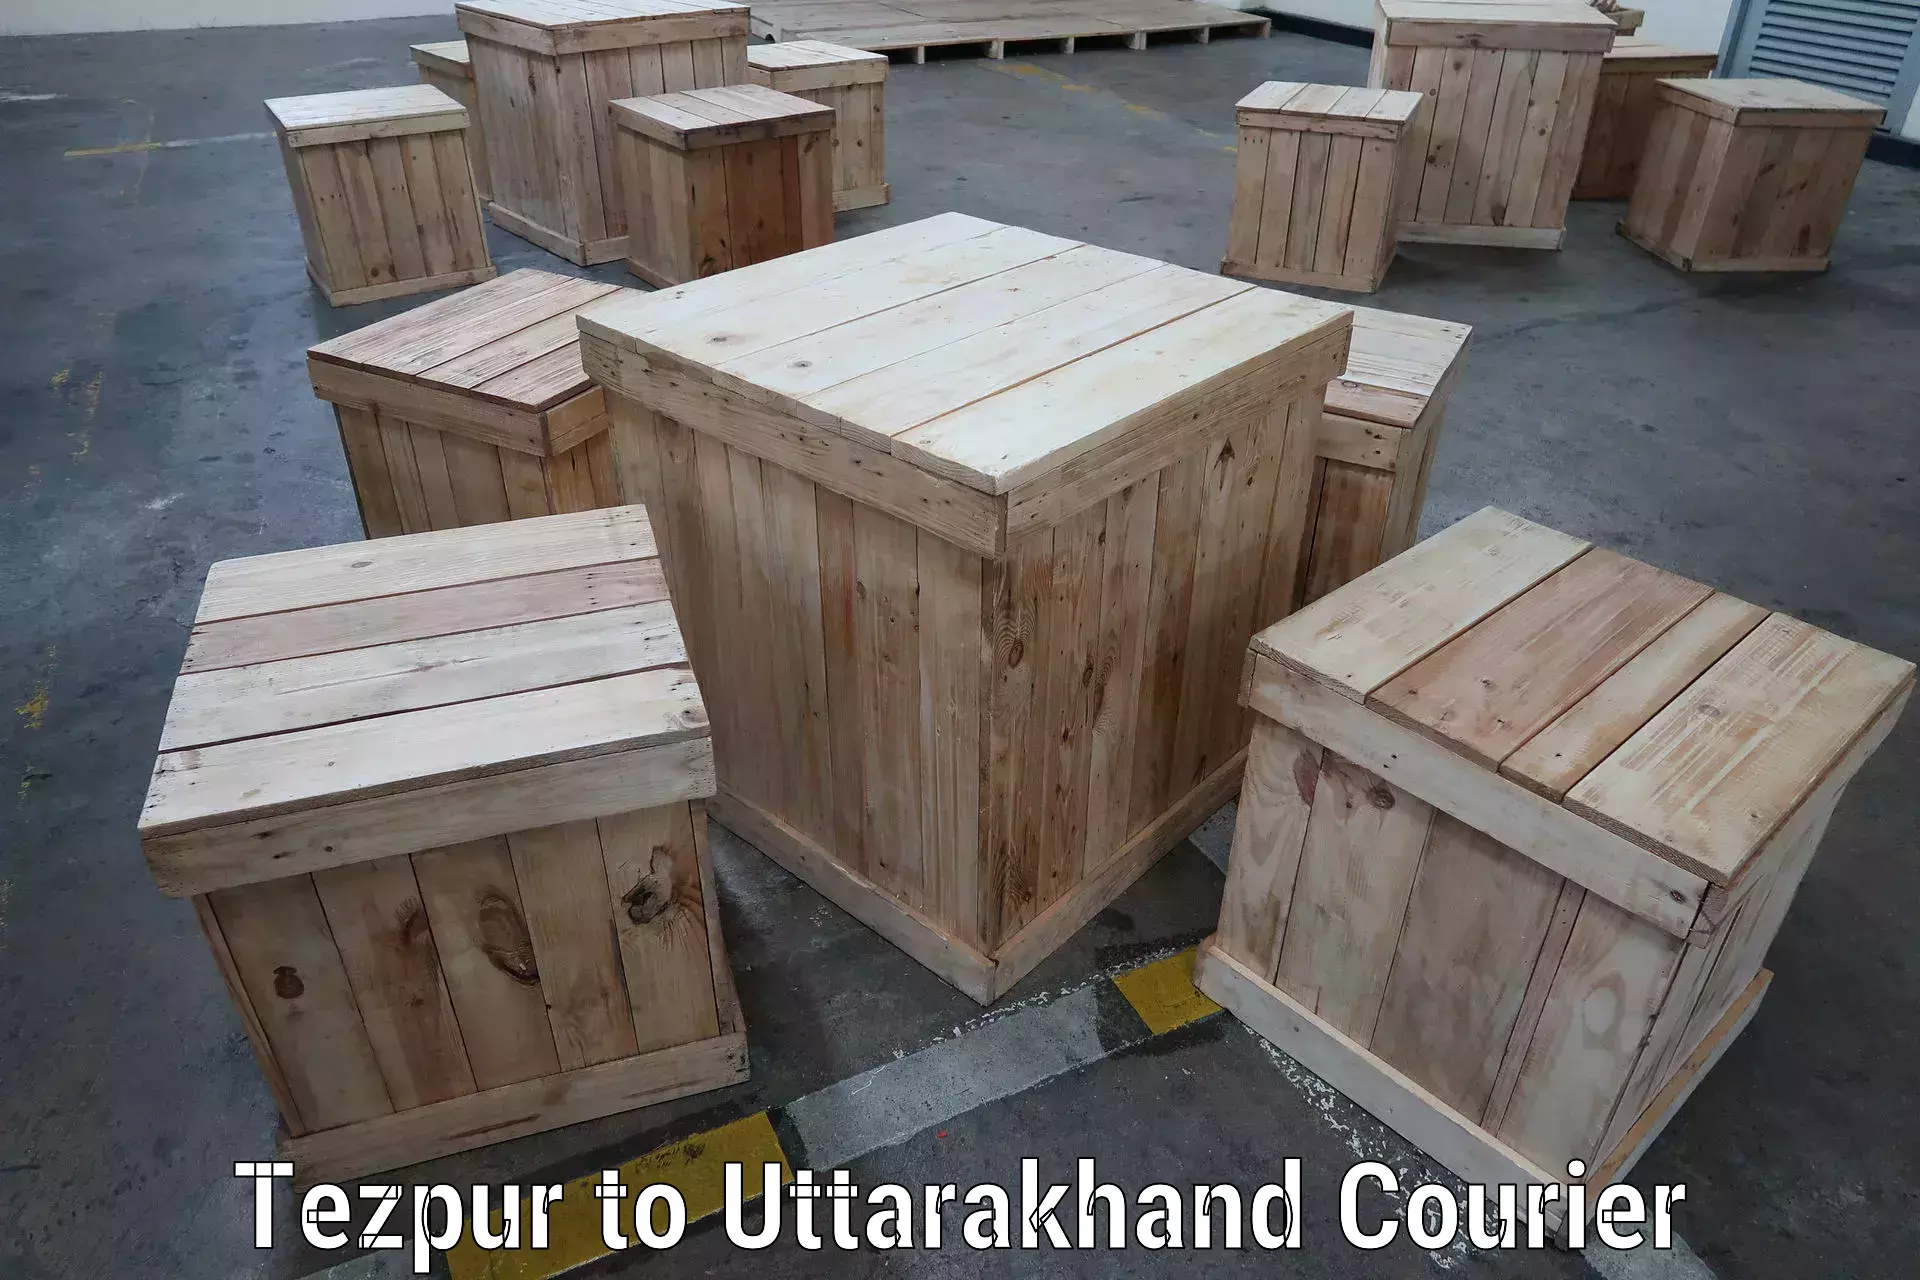 Same-day delivery options Tezpur to Uttarakhand